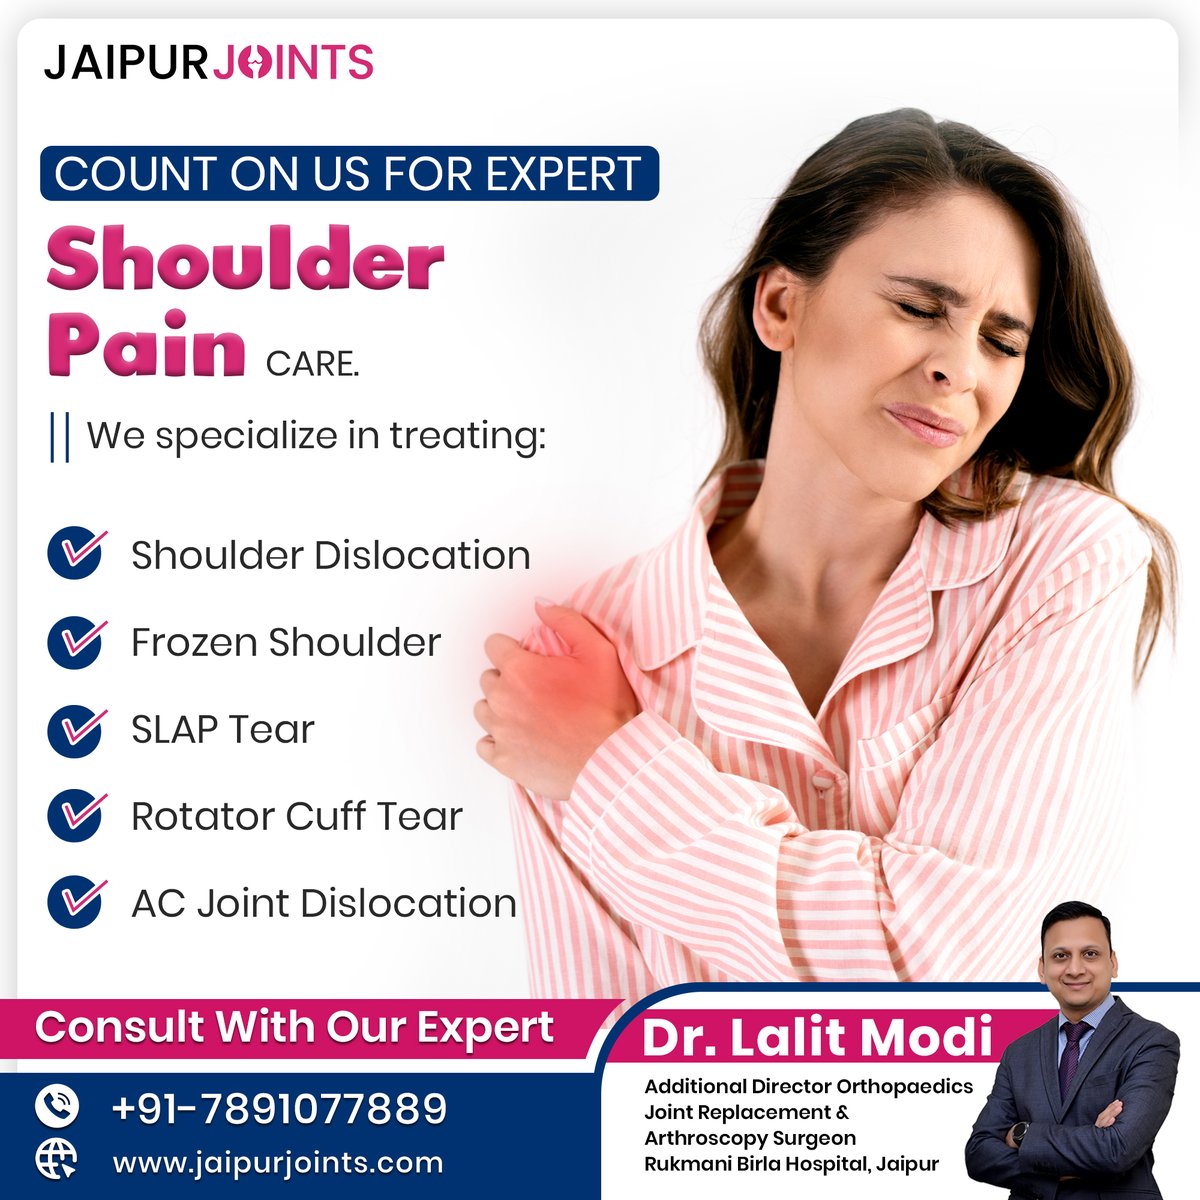 Count on Us for Expert Shoulder Pain Care.

We specialize in treating:

- Shoulder Dislocation
- Frozen Shoulder
- SLAP Tear
- Rotator Cuff Tear
- AC Joint Dislocation

Schedule Your Appointment Today: 7891077889

#Shoulderdislocation #ShoulderArthritis #ACJointDislocation